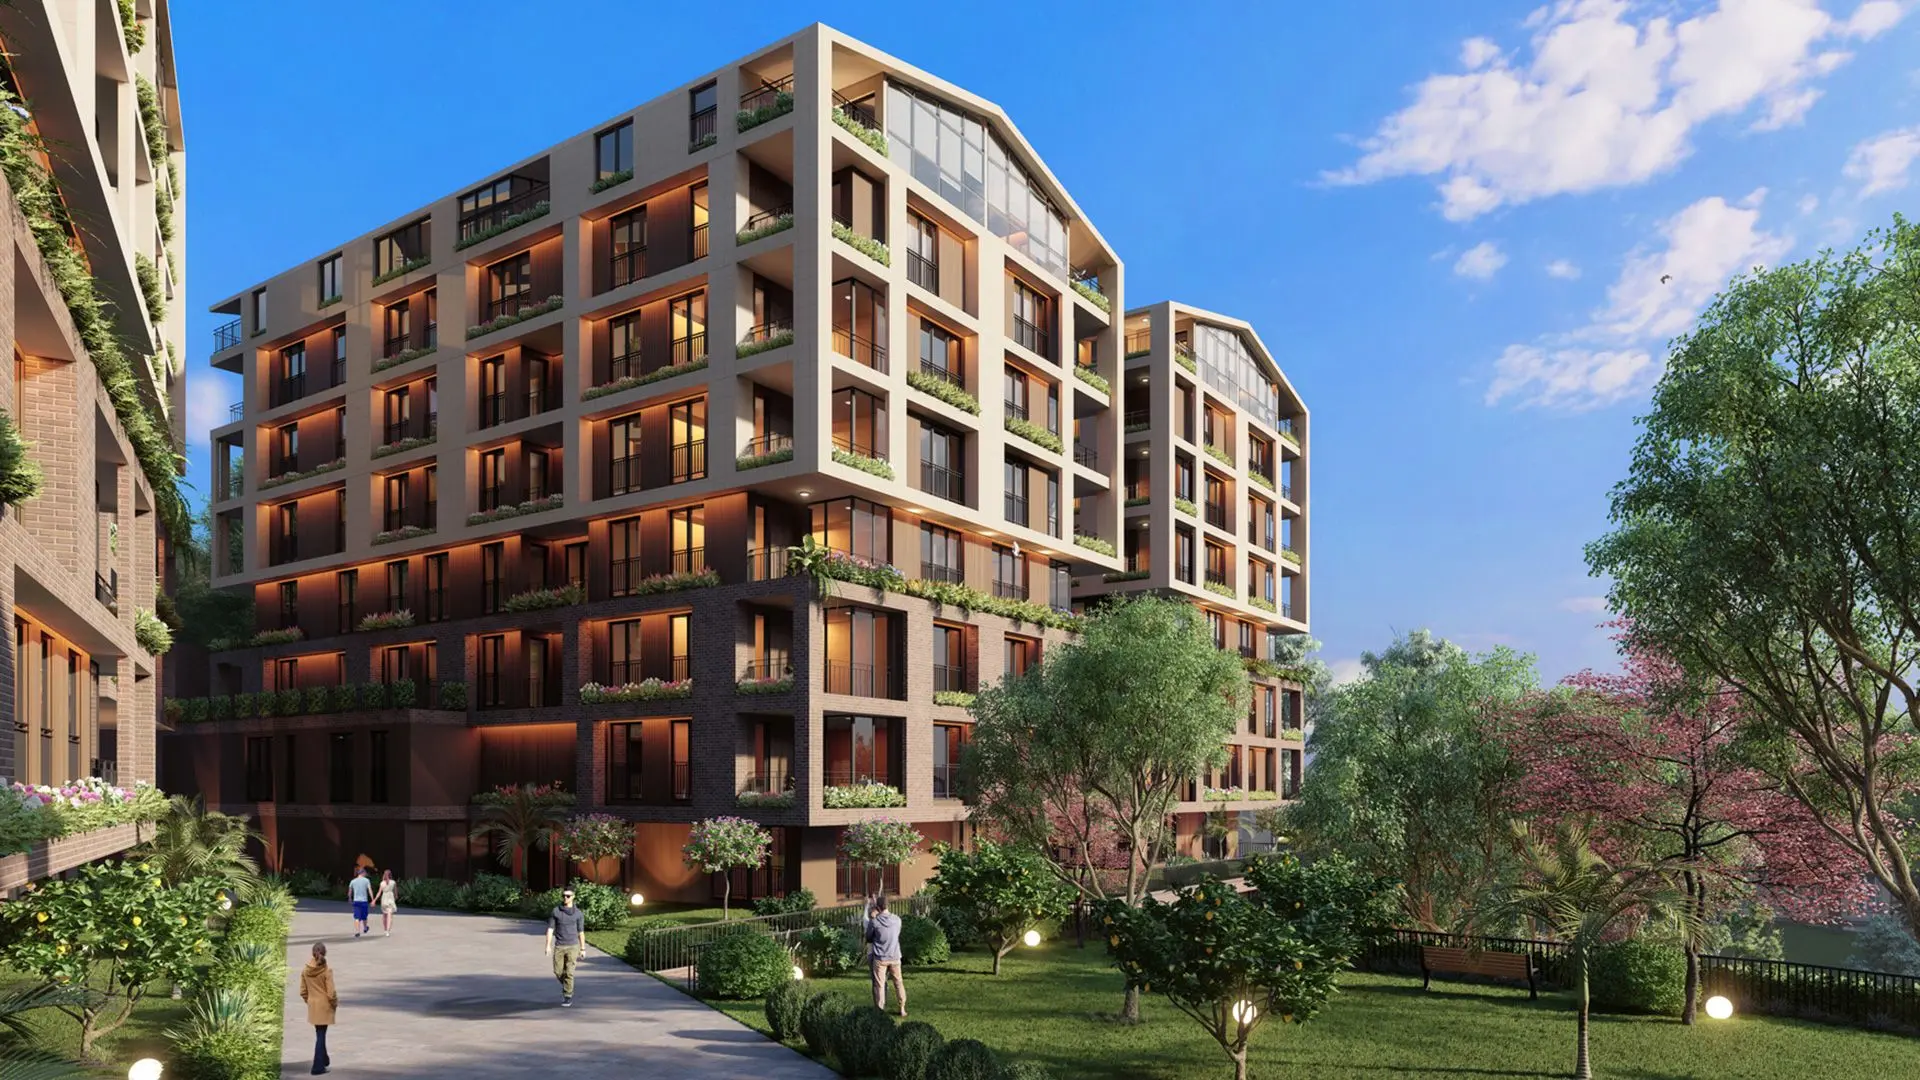 LUXURIOUS PROJECT IN ISTANBUL NEAR THE FAMOUS JULY 15 BRIDGE